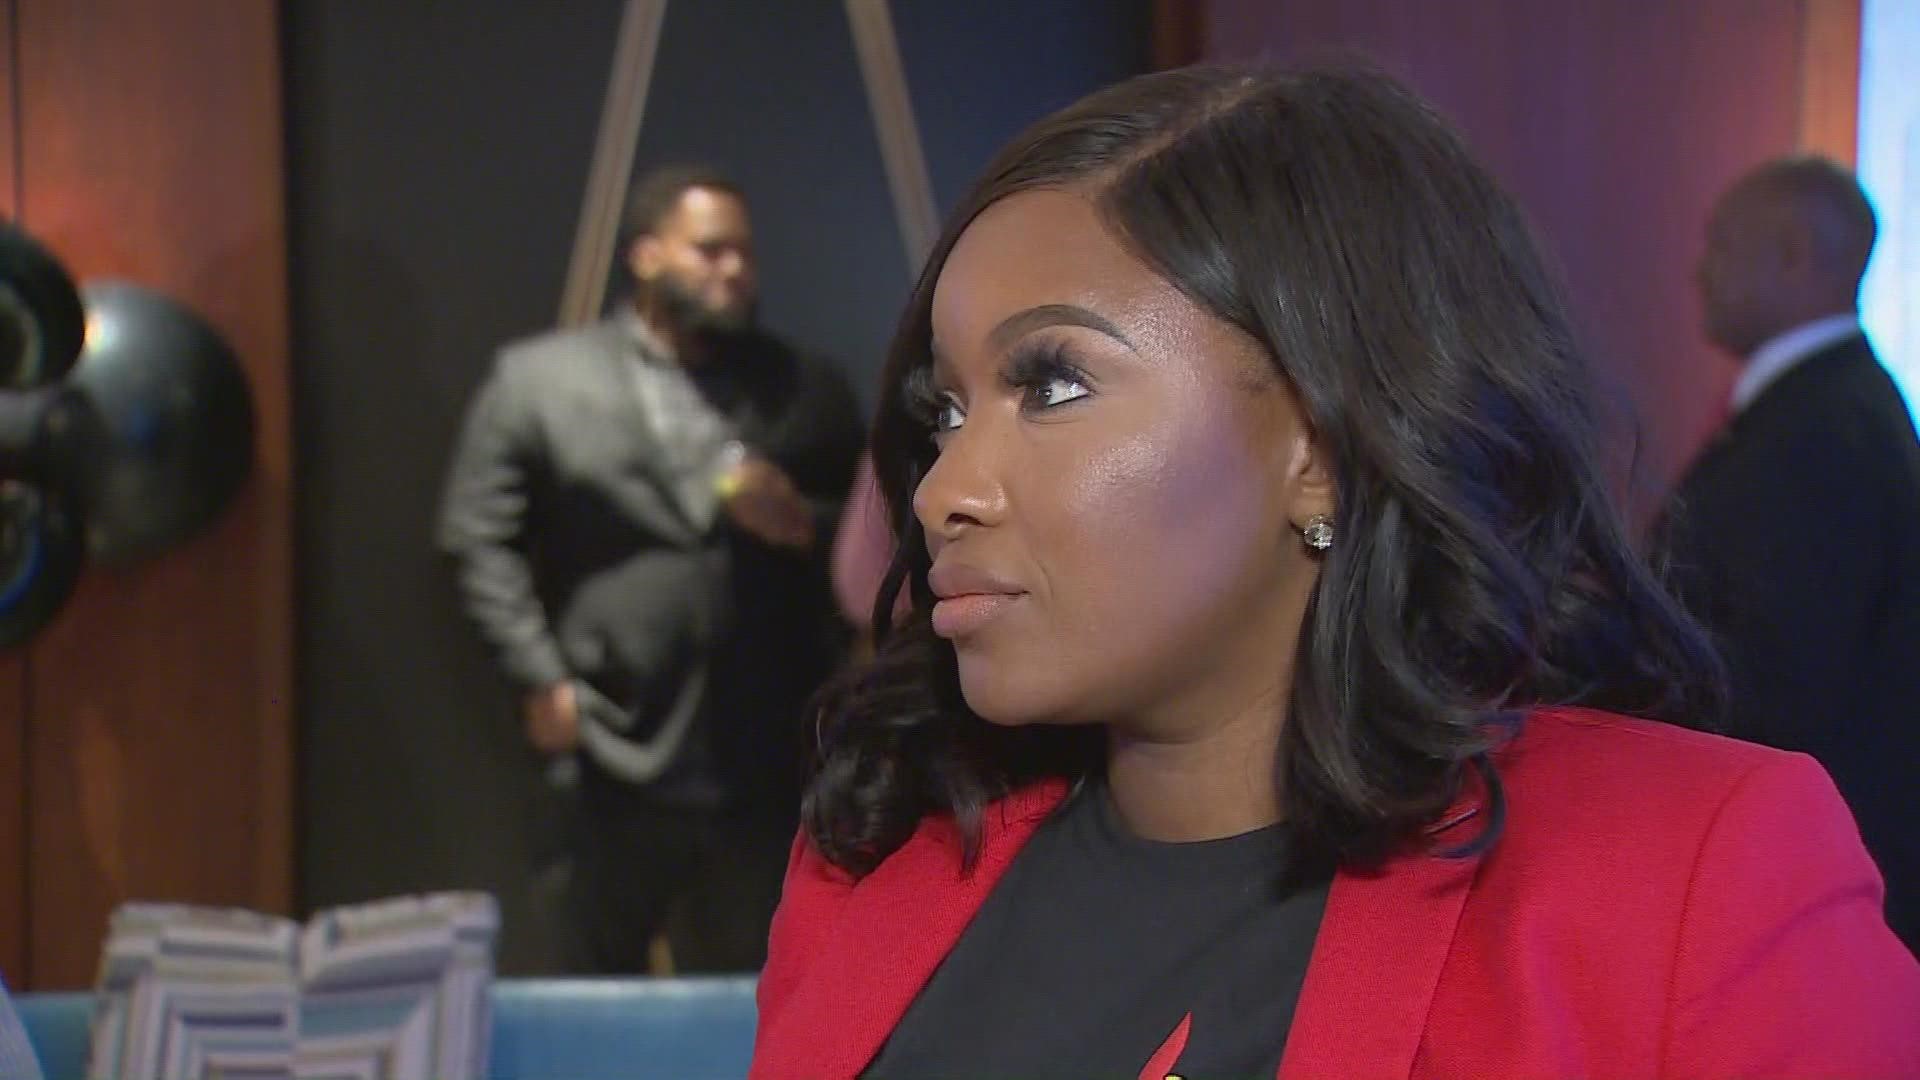 Jasmine Crockett spoke about the possibility of going through another runoff election in her bid to replace Eddie Bernice Johnson in Congress.